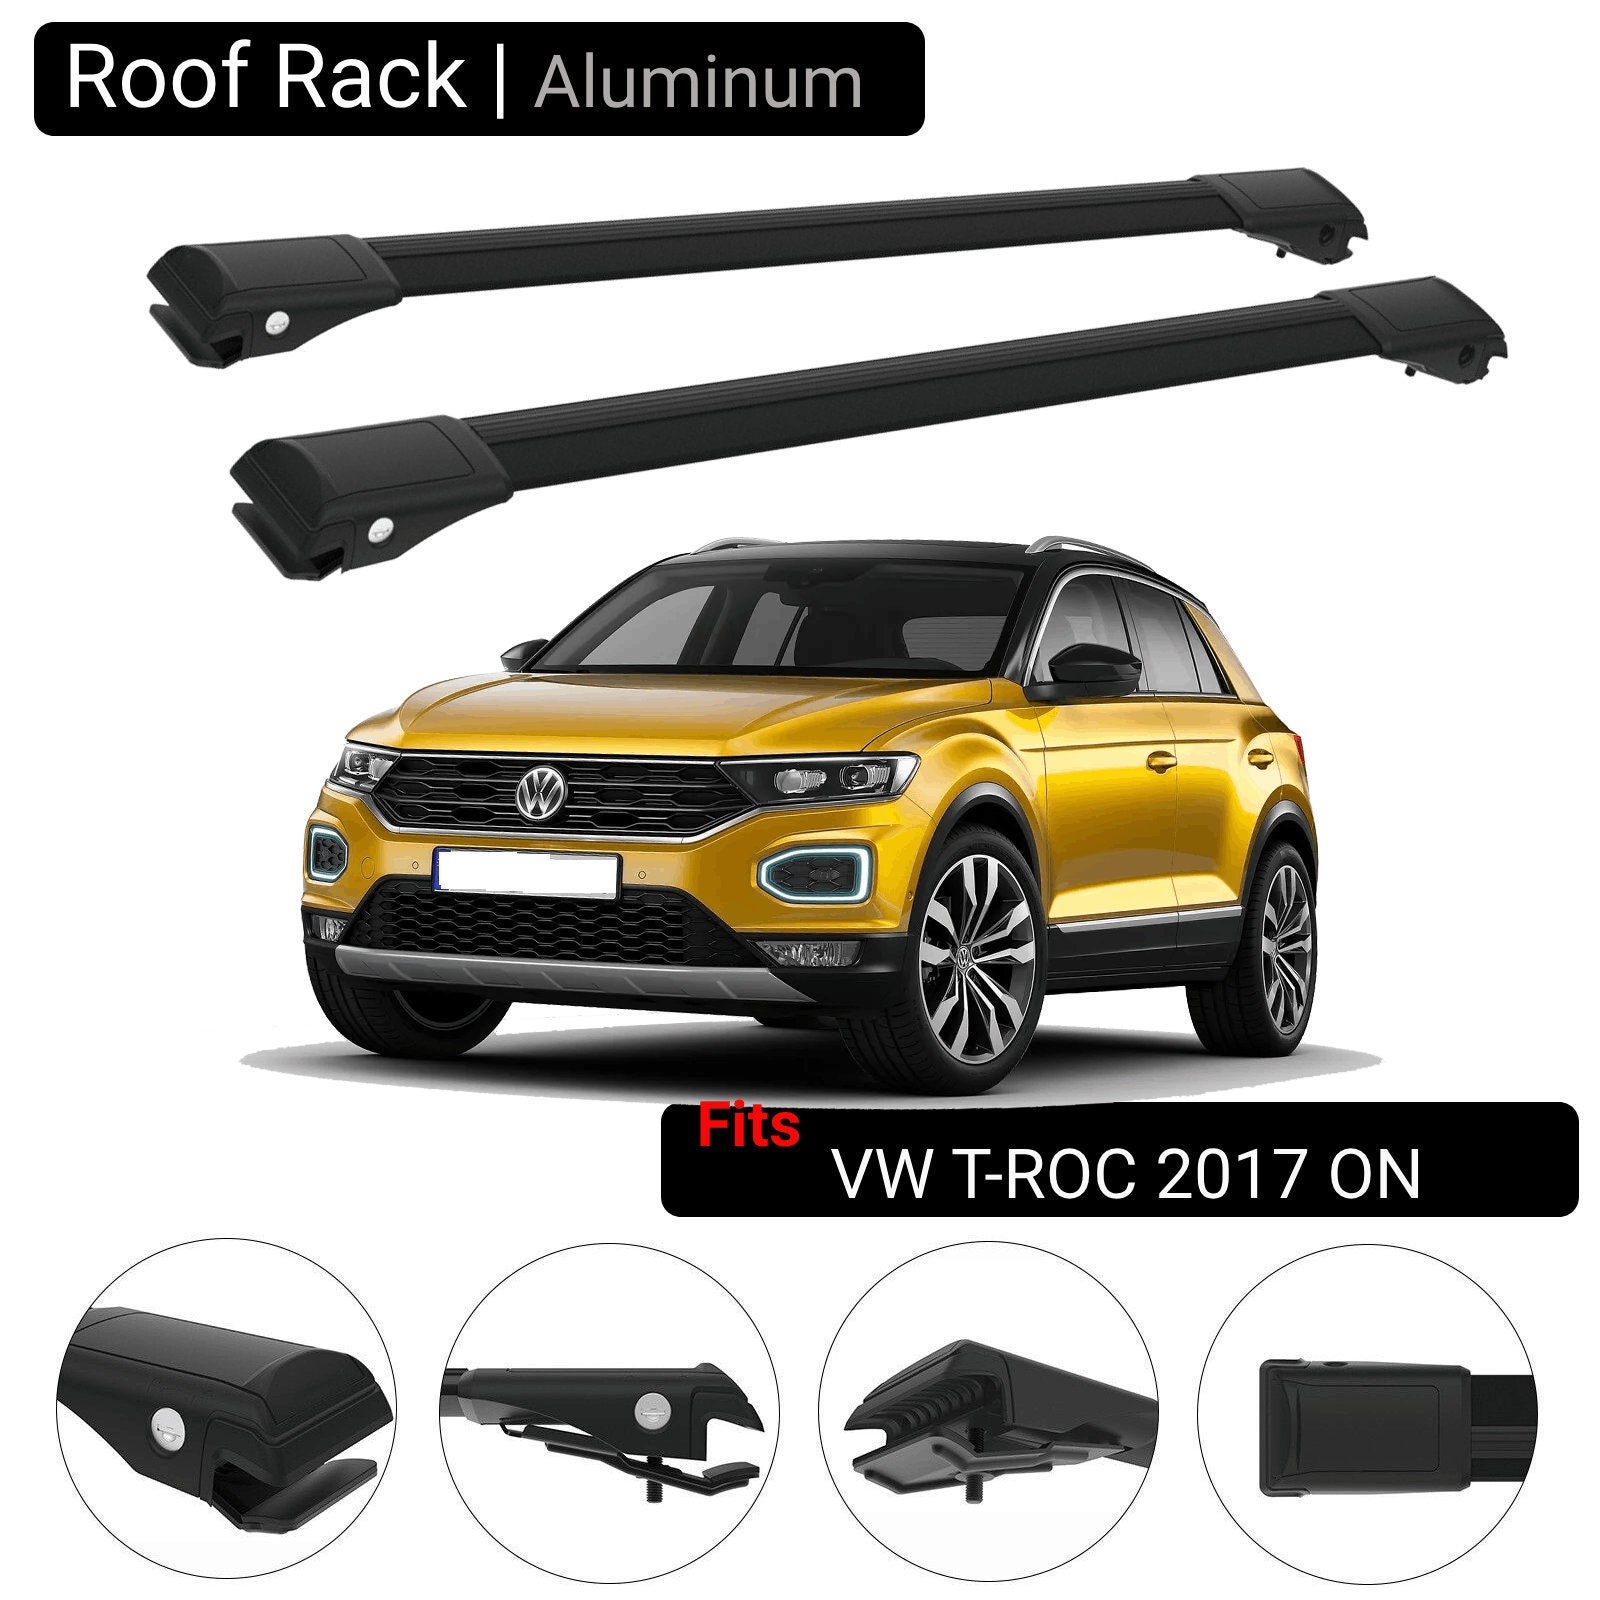 Bike carrier for VW T-Roc (A1) 